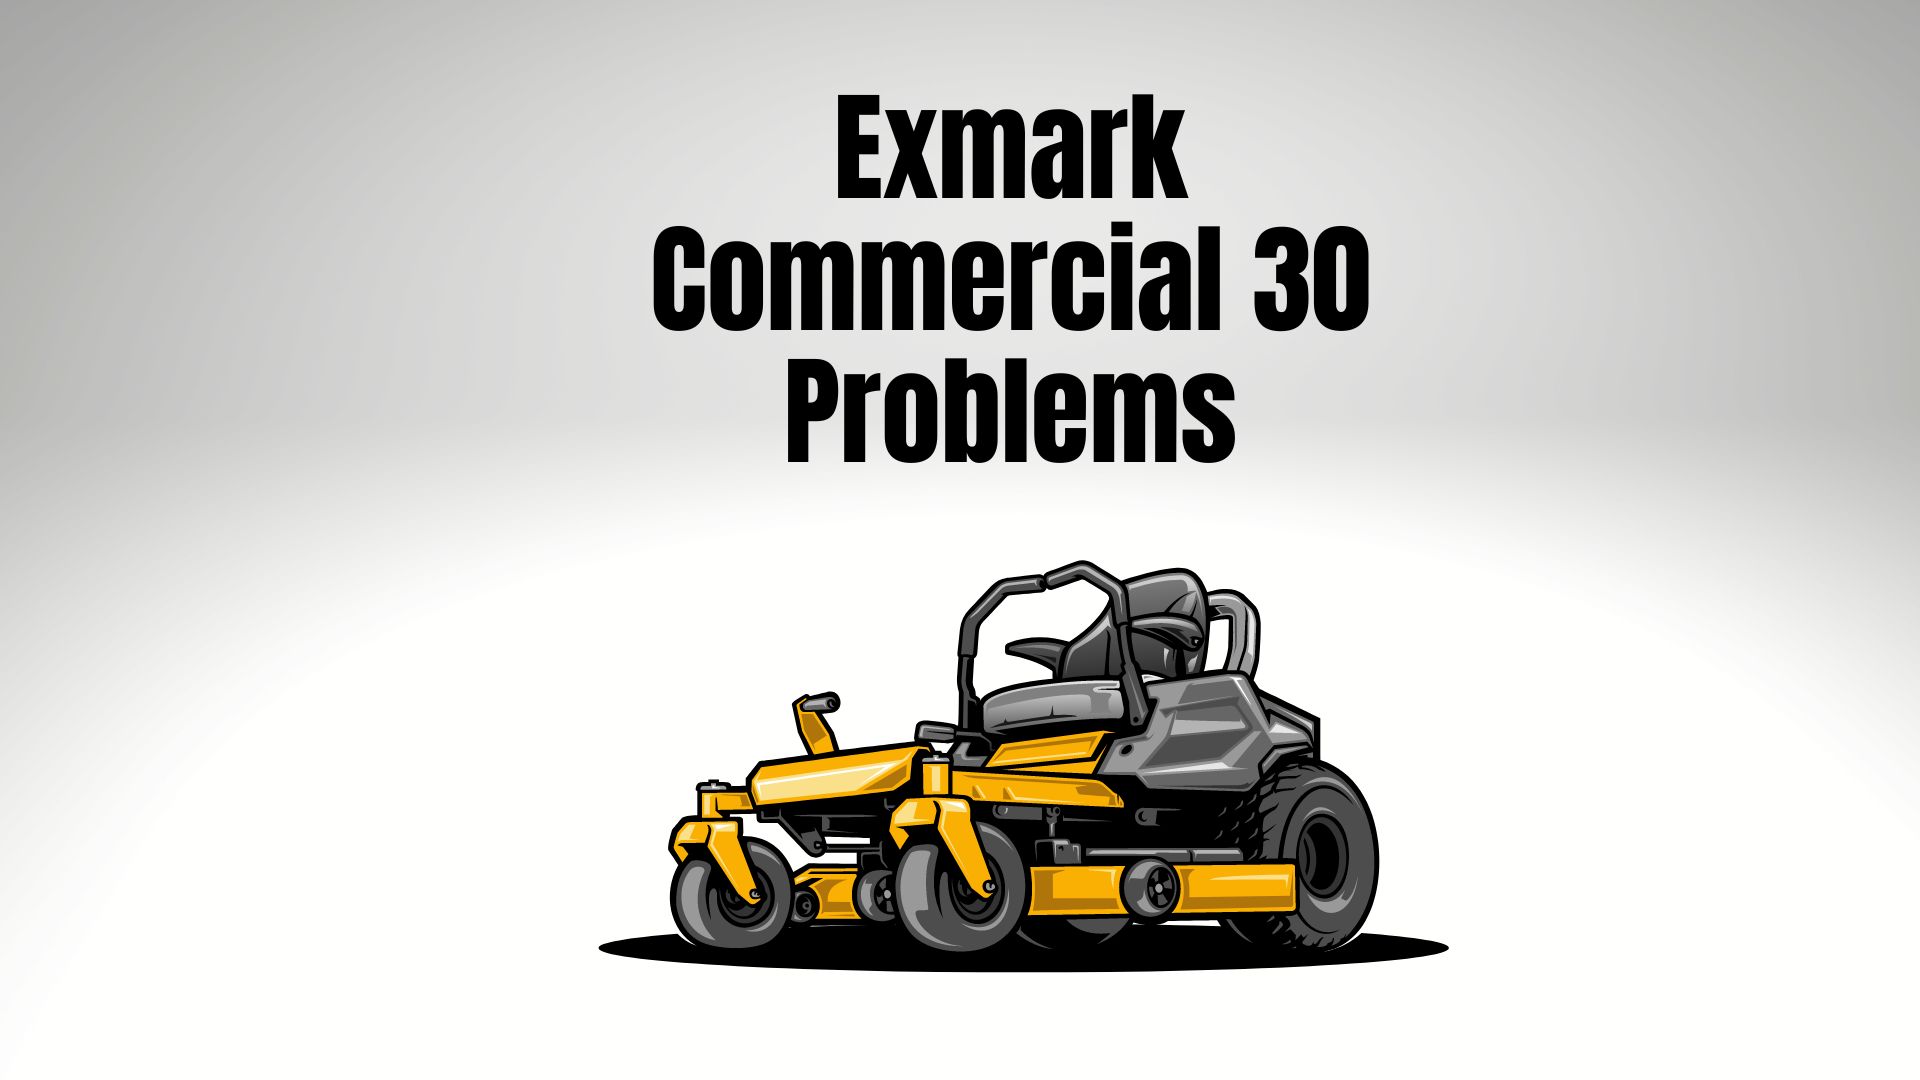 Exmark Commercial 30 Problems